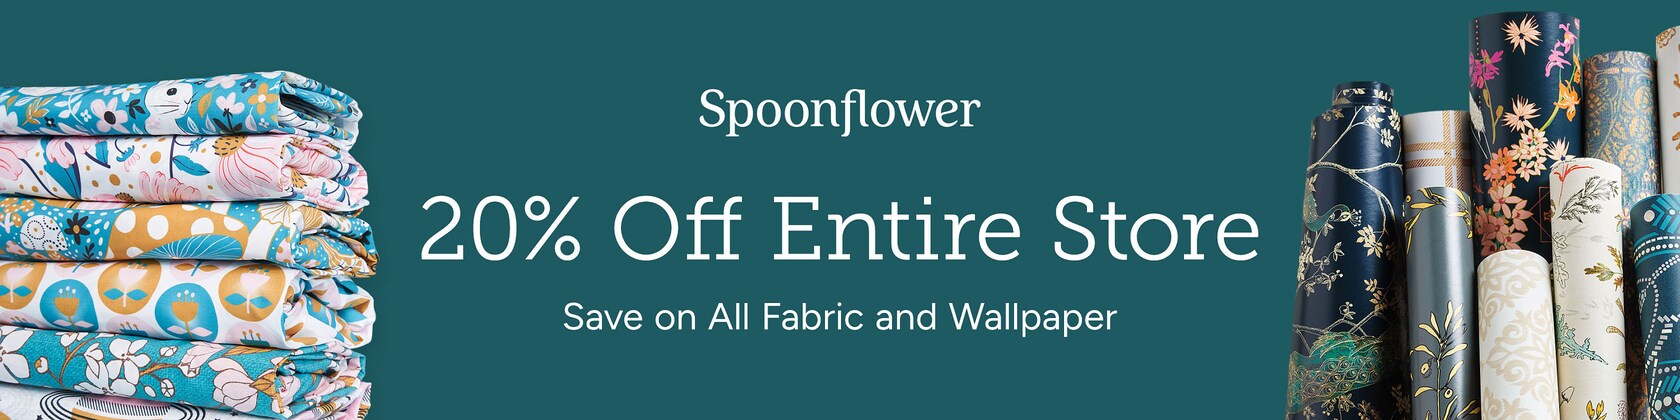 Spoonflower Fill a Yard - Selling Your Pattern Designs with Spoonflower 